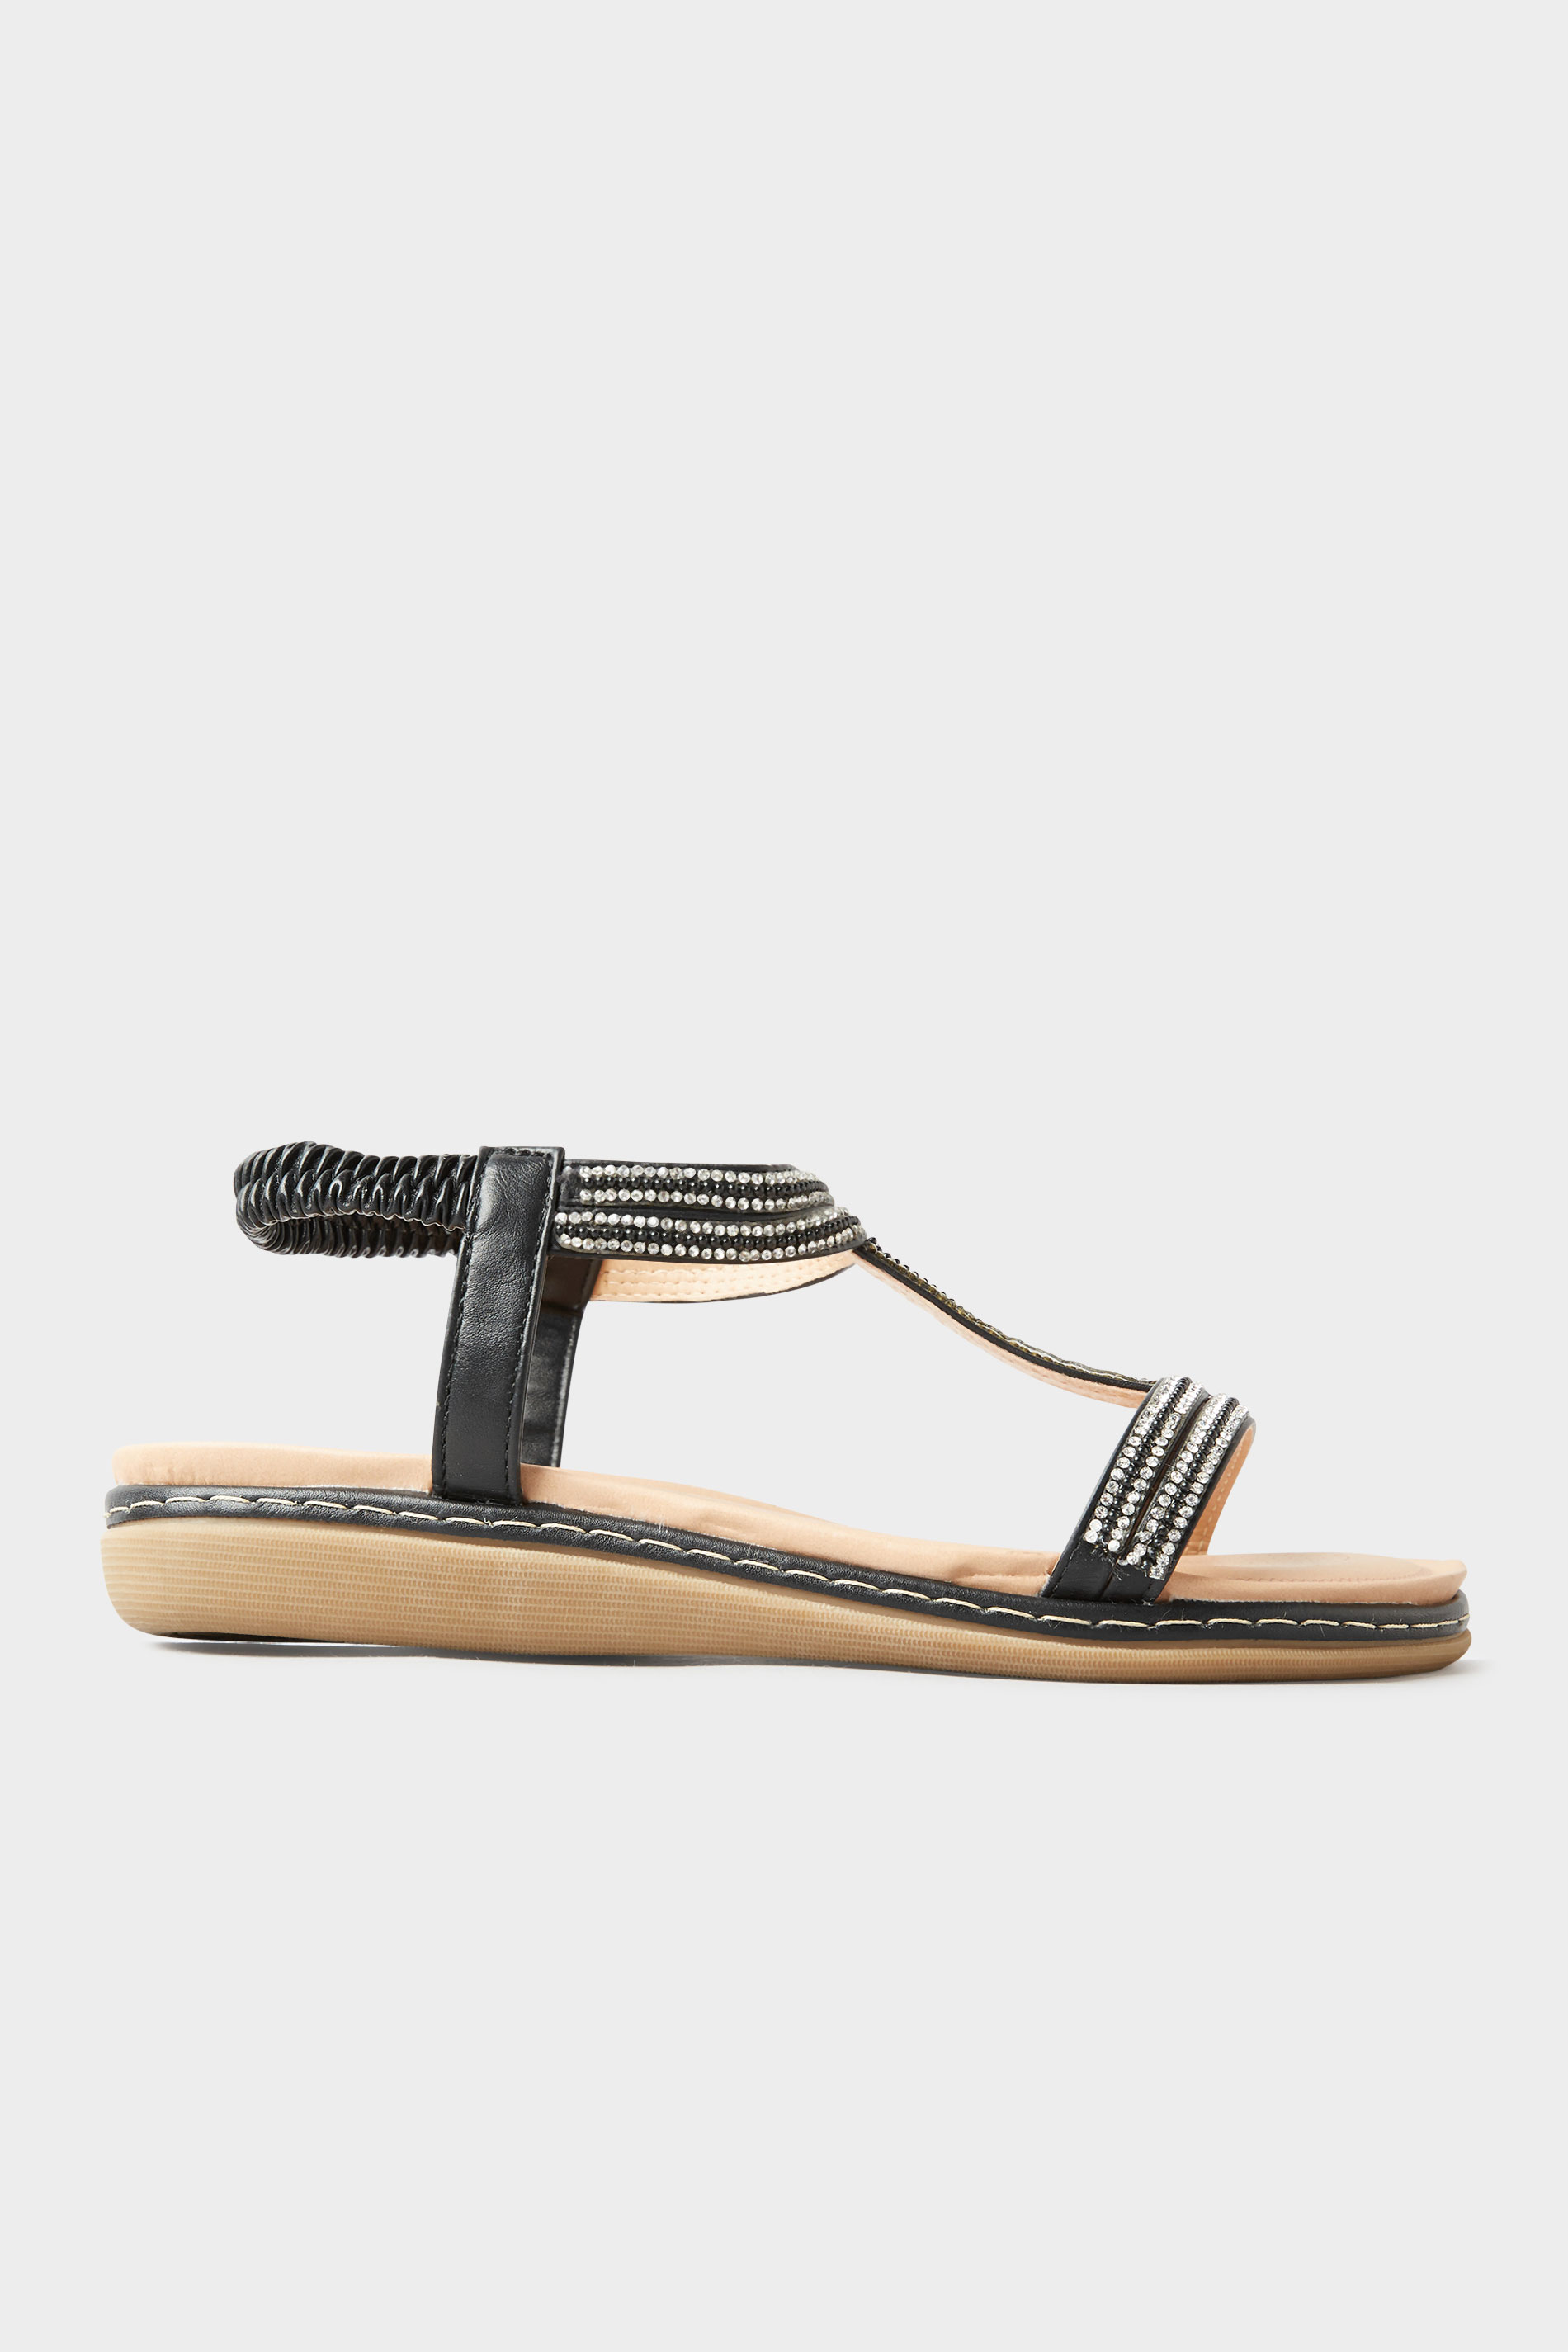 Black Diamante H-Band Sandals In Extra Wide Fit | Long Tall Sally